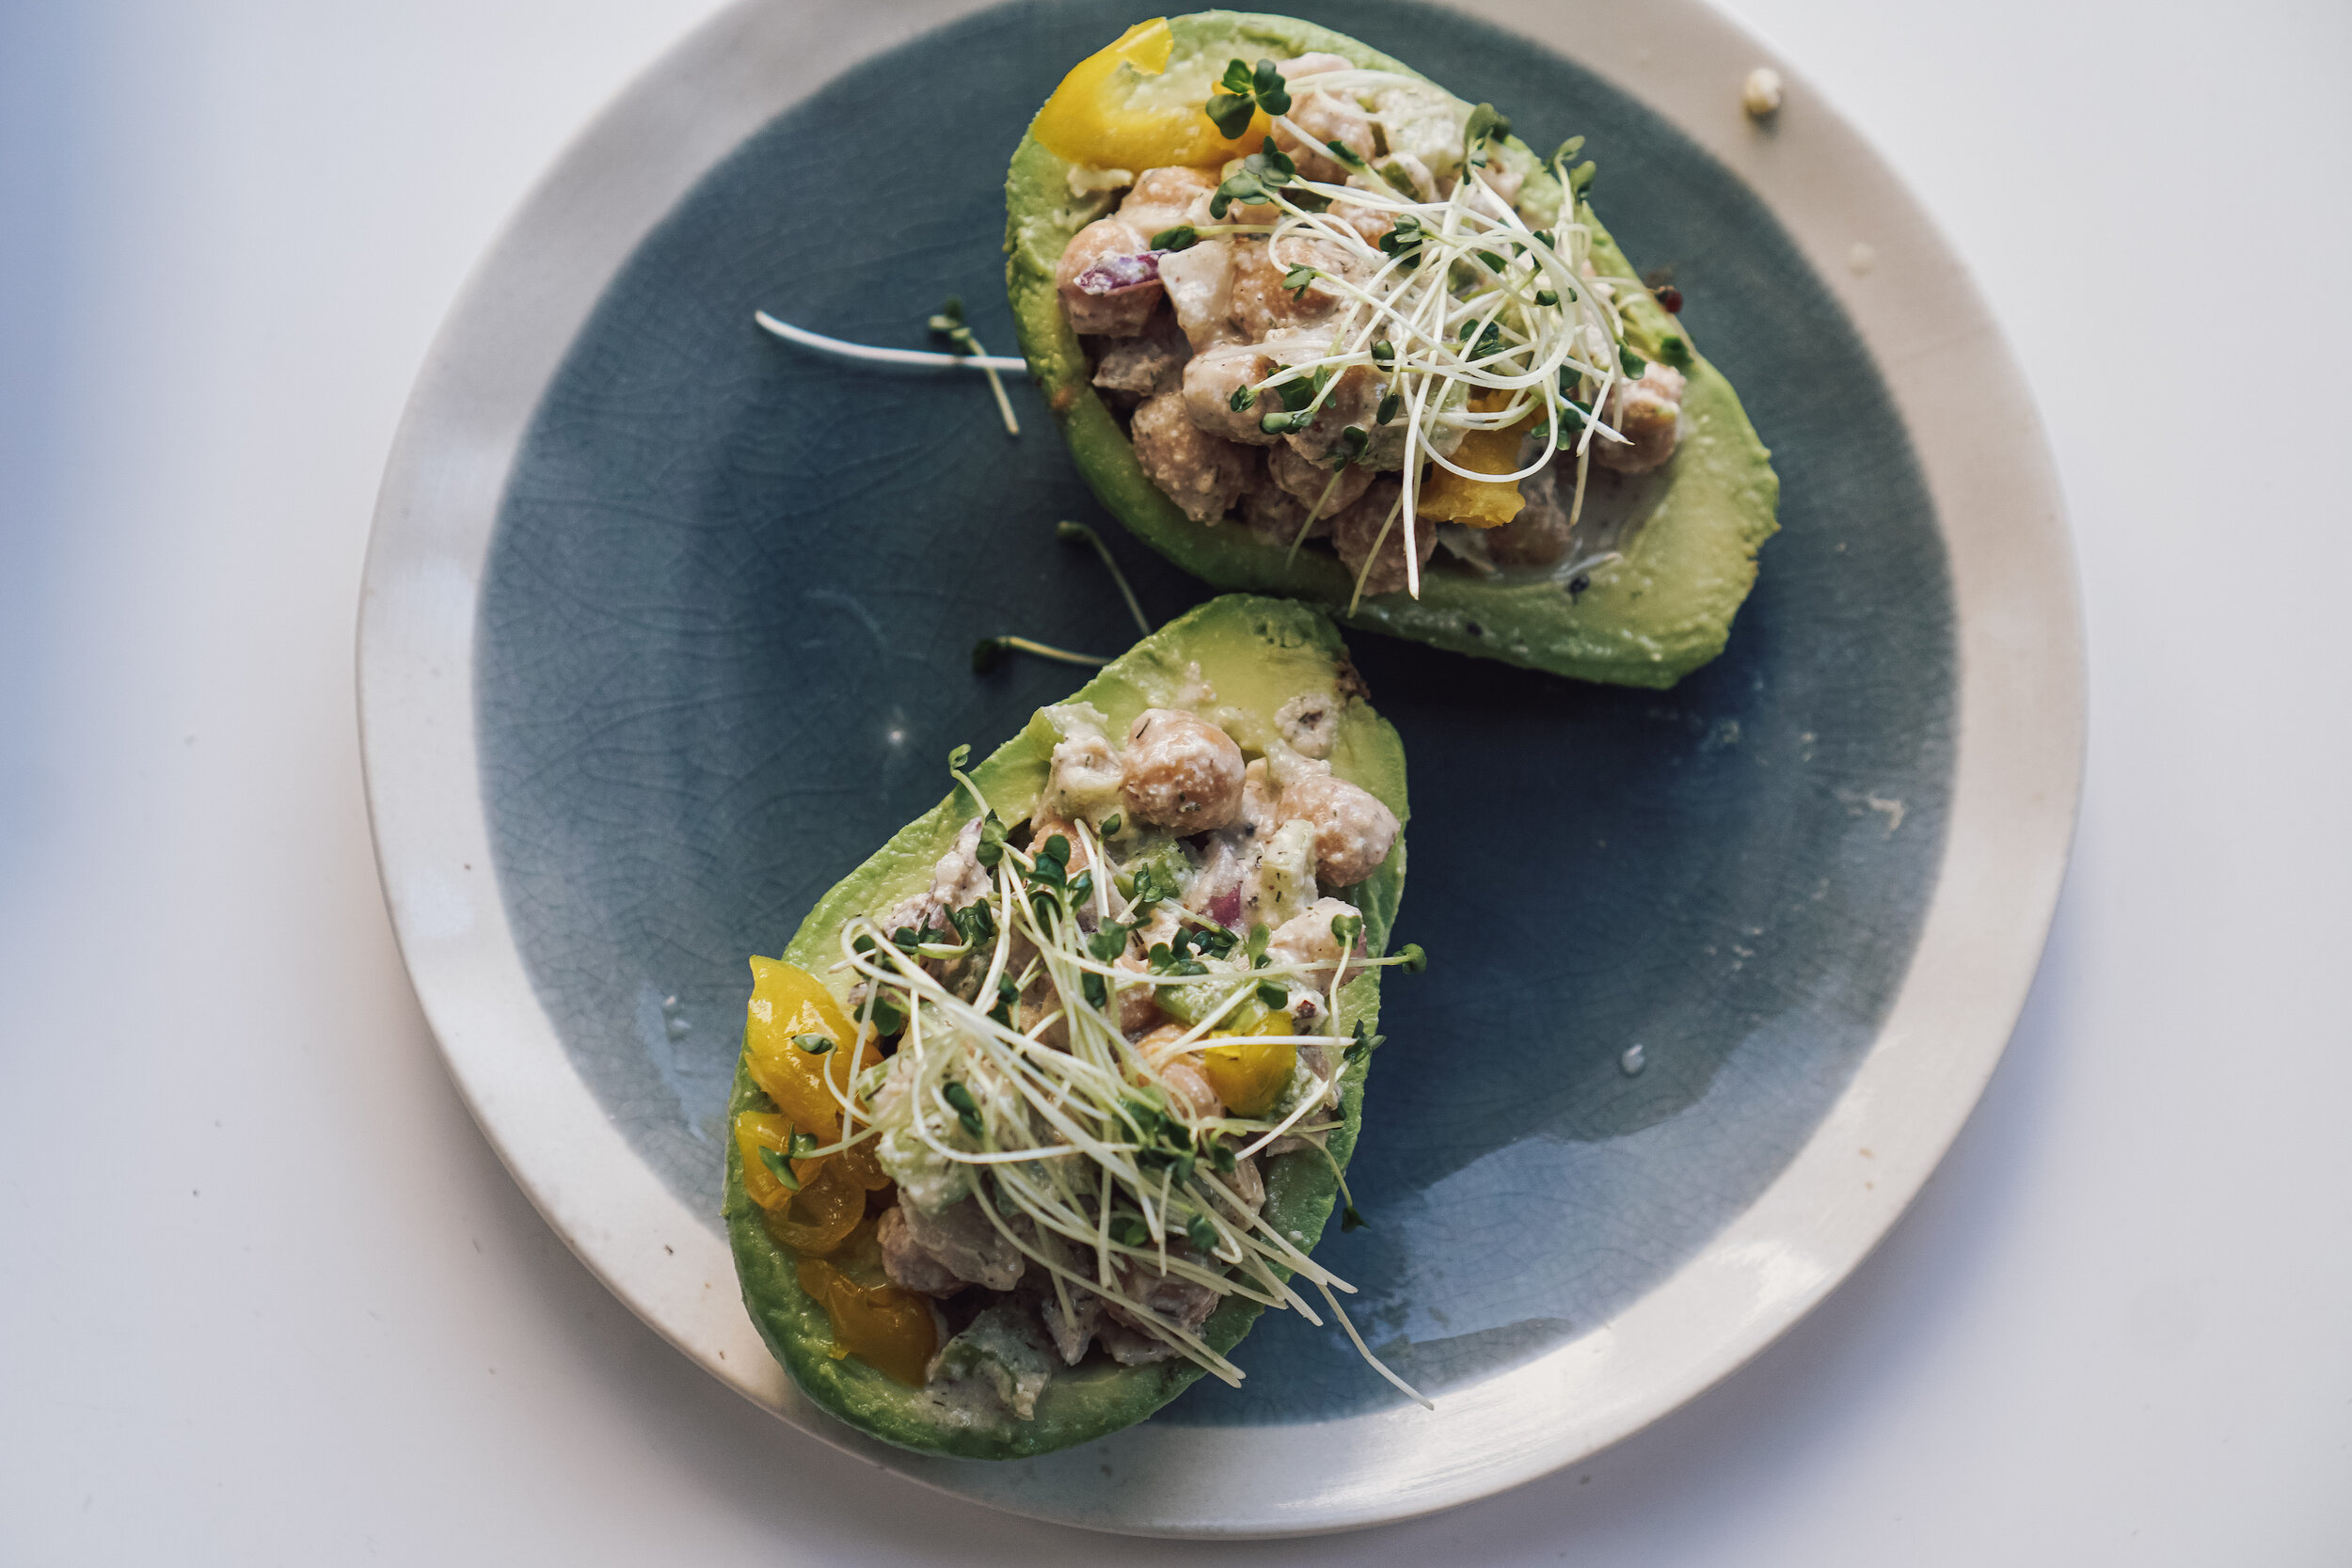 From Burgers to Smoothies: 6 Incredible Avocado Recipes to Make Right Now Mock+Tuna+Stuffed+Avocado+1